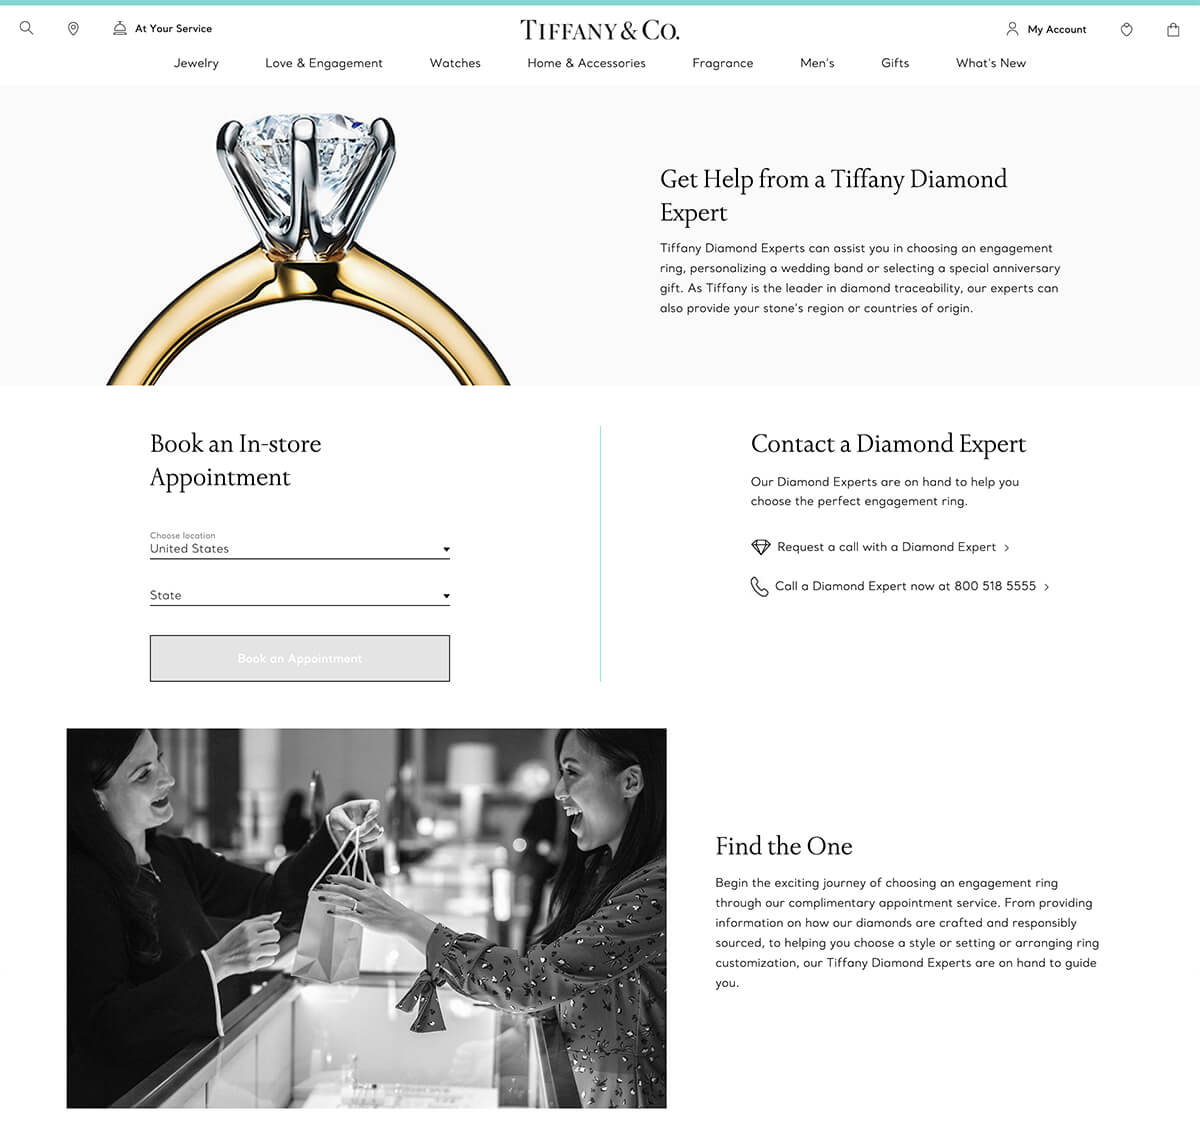 Luxury marketing example - How to sell luxury items online